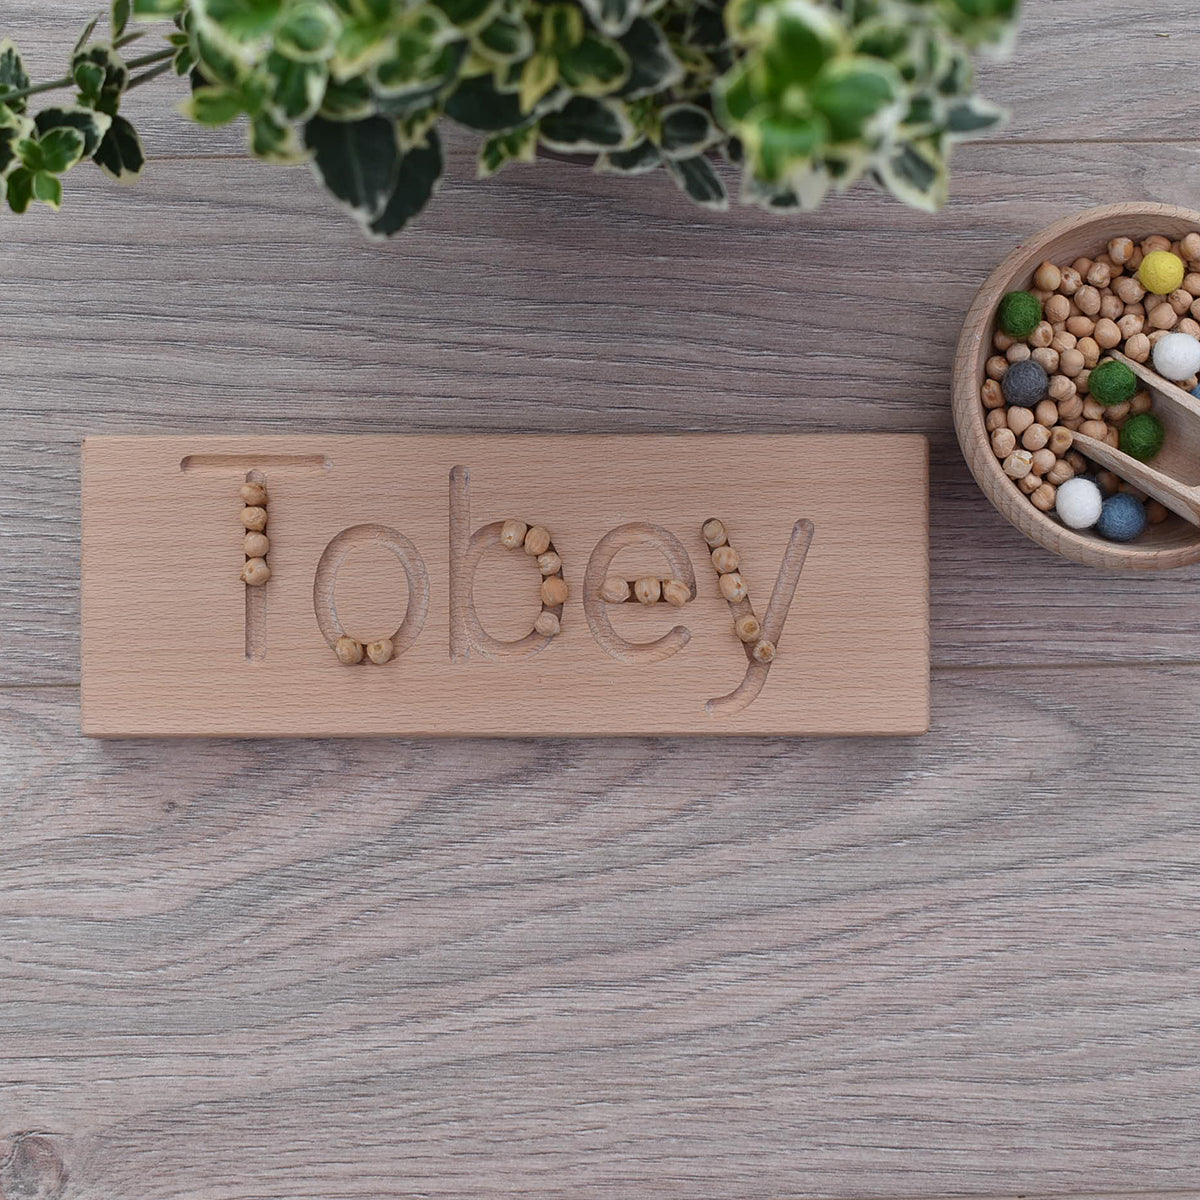 Tobey DrawMe personalised wooden name board used for learning to write and fine motor skill sensory play